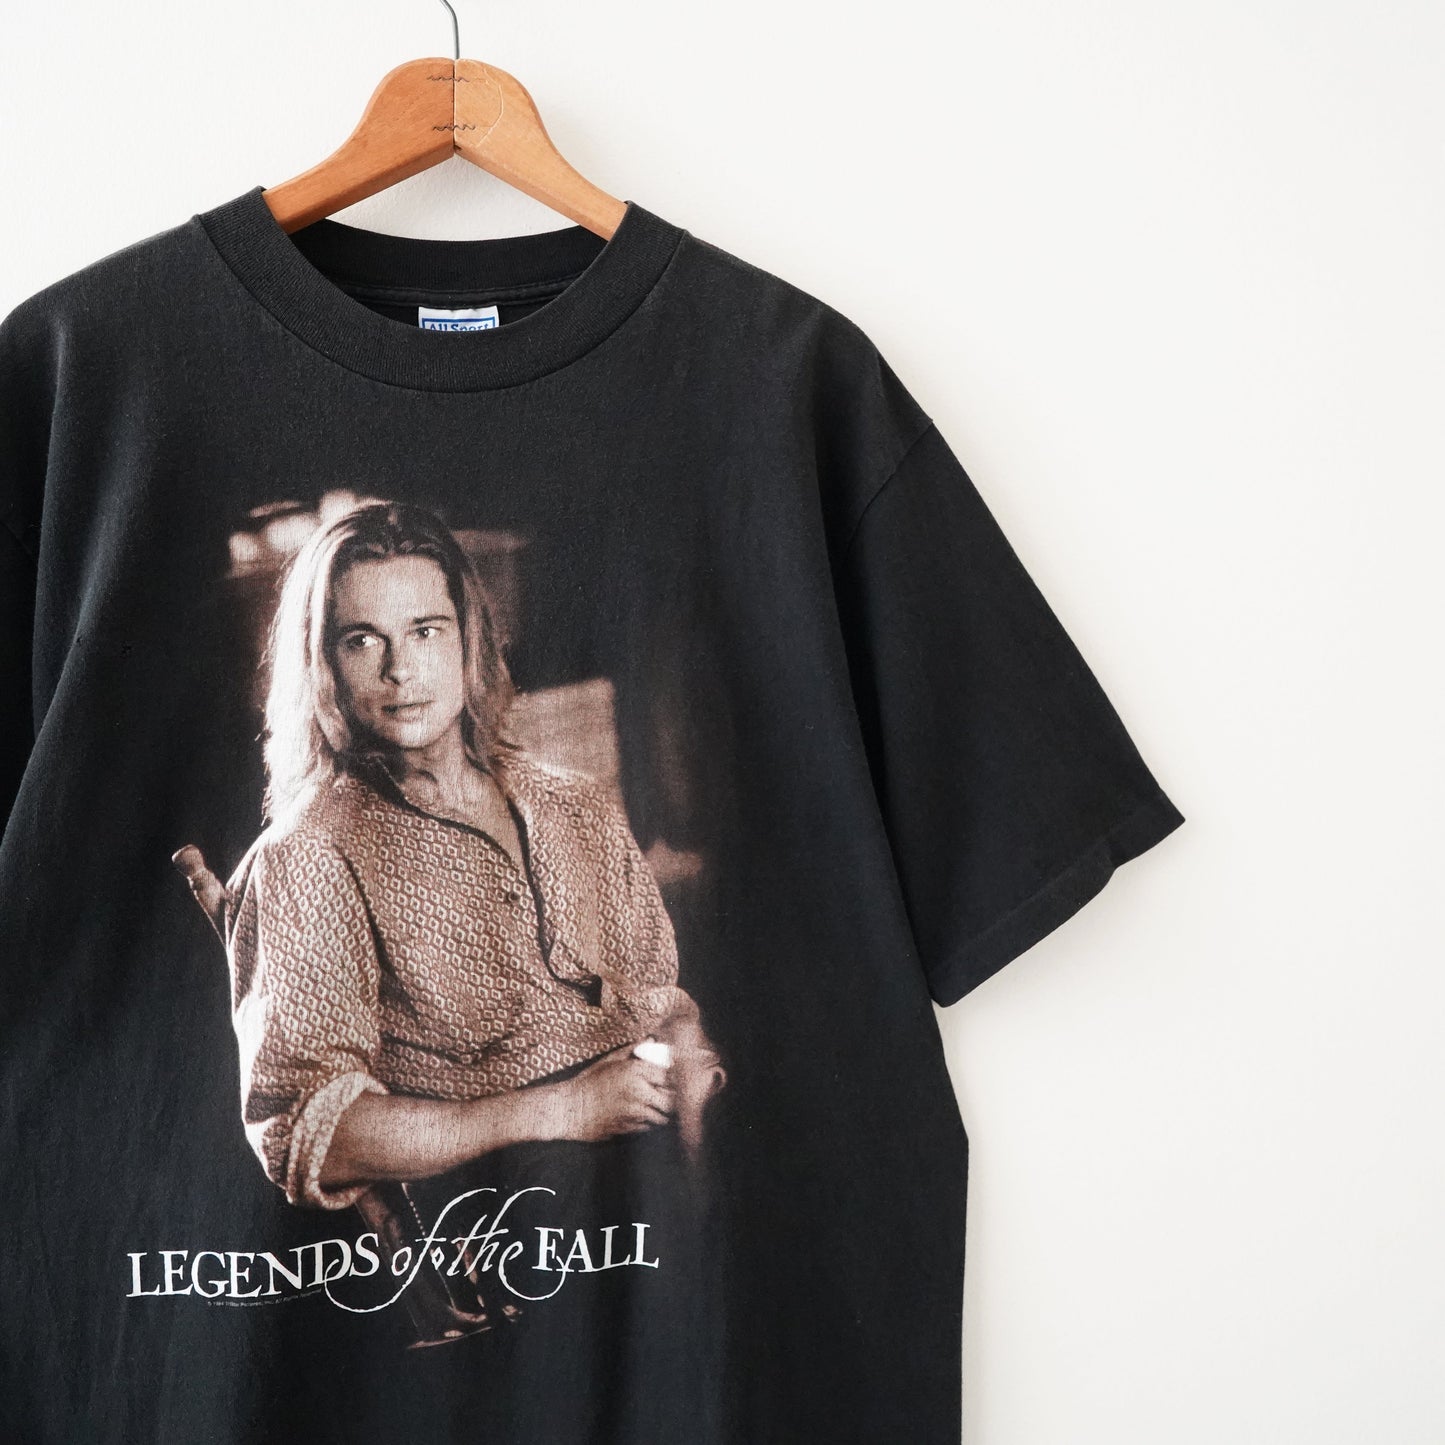 90s Legends of the Fall tee